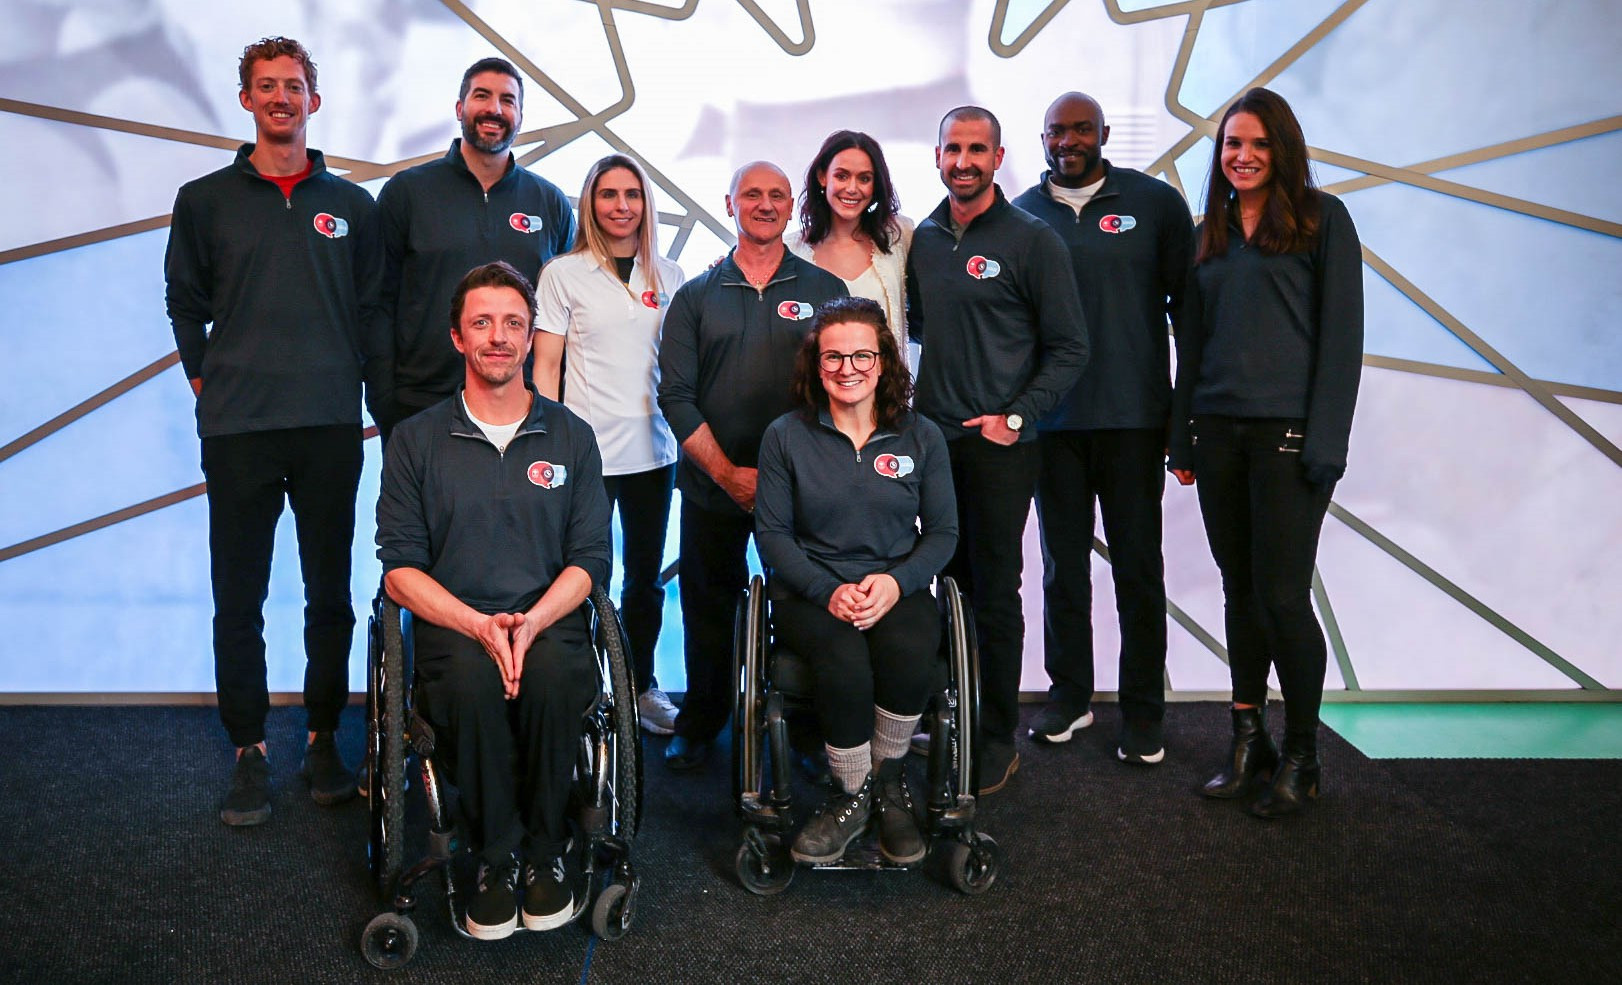 A host of Canadian Paralympians took part in the event ©CPC